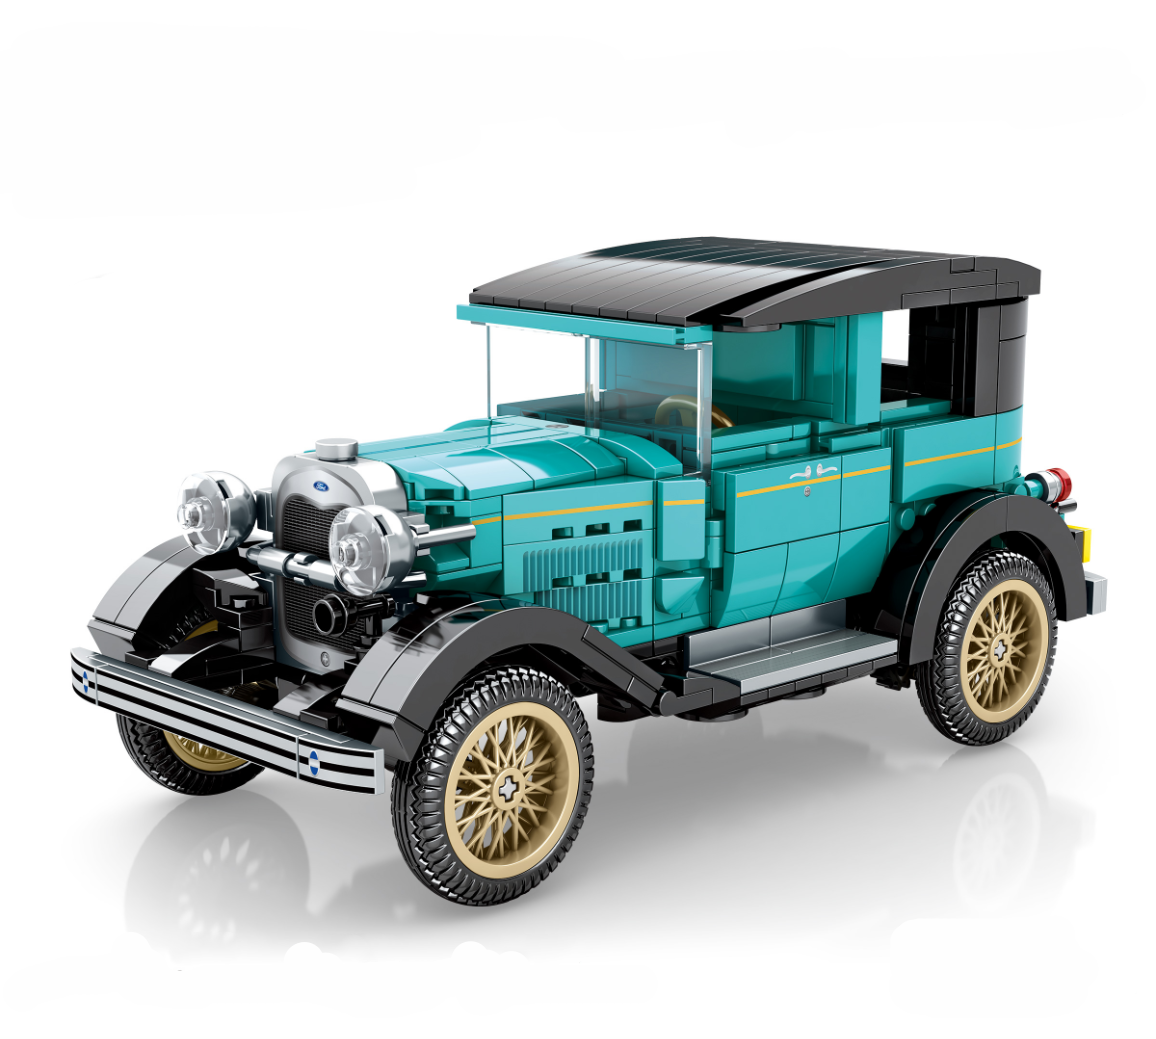 Конструктор SEMBO BLOCK Ford 1930 Model A, 659 деталей, 705807 maisto 1 24 2015 ford mustang static die cast vehicles collectible model car toys